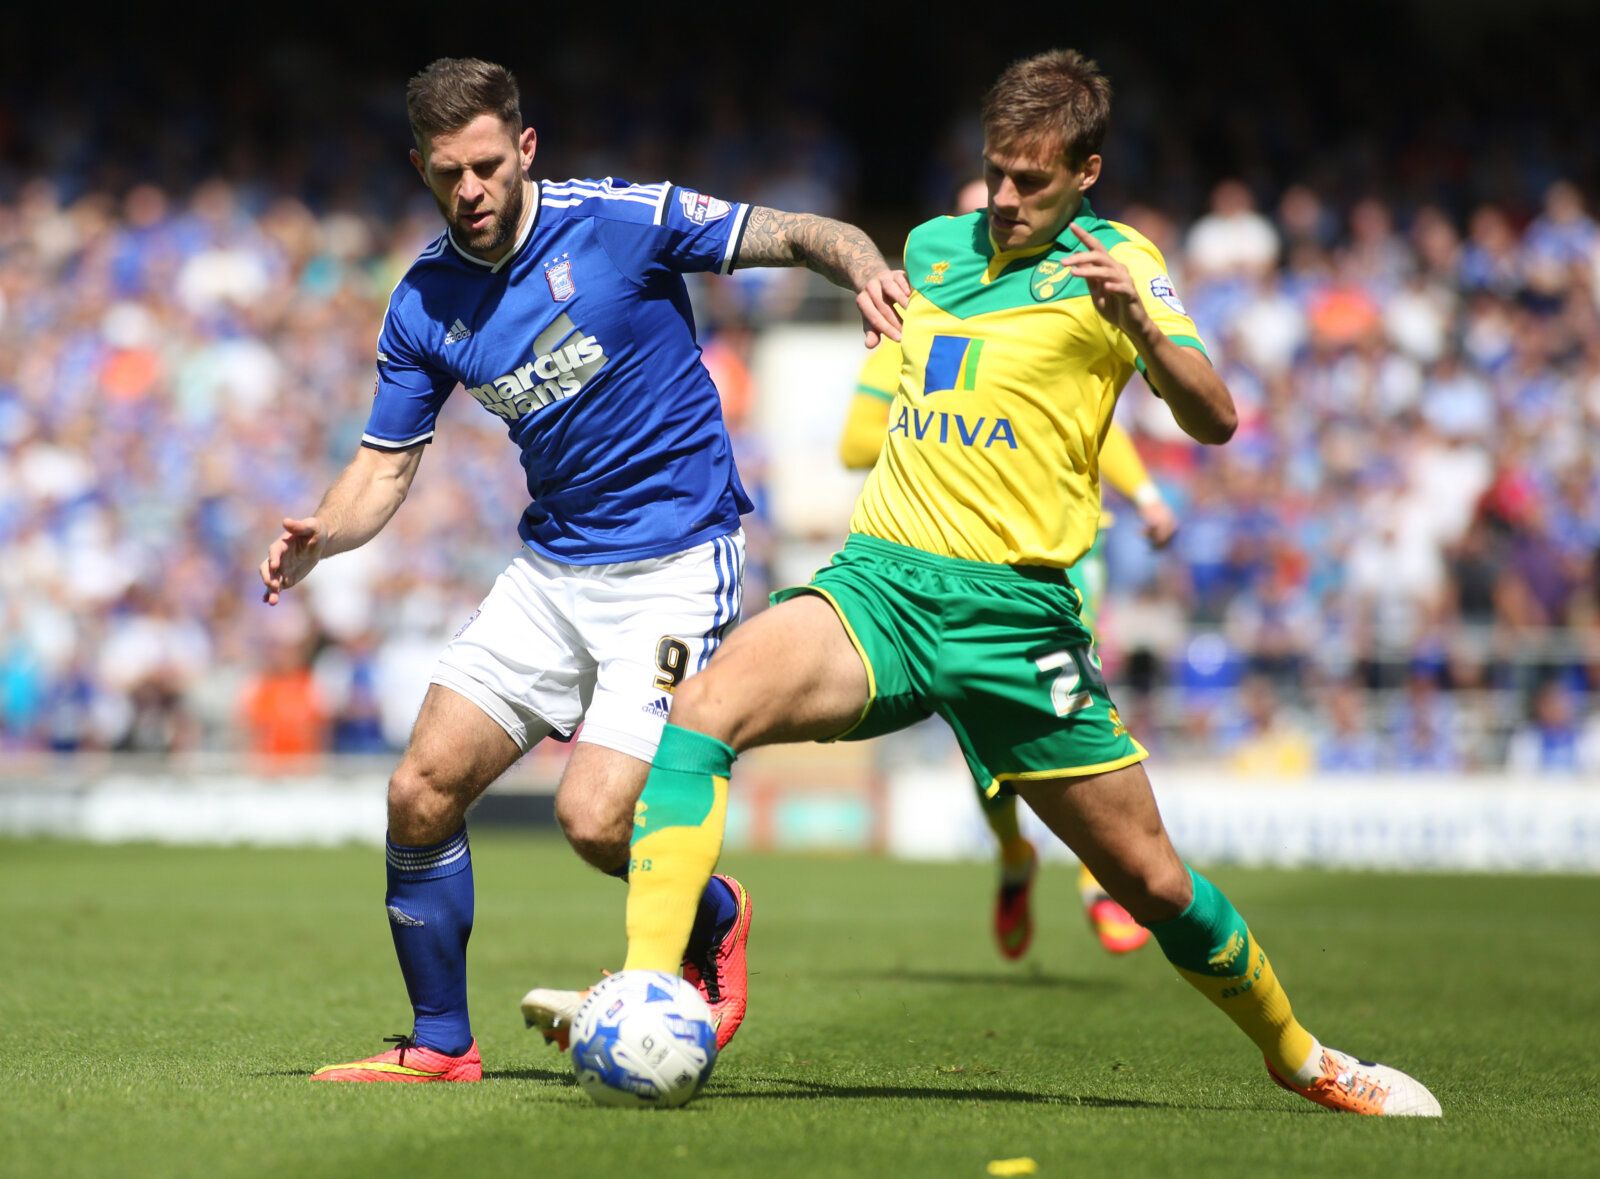 Football - Ipswich Town v Norwich City - Sky Bet Football League Championship - Portman Road - 23/8/14 
Ipswich's Daryl Murphy in action with Norwich's Ryan Bennett 
Mandatory Credit: Action Images / Lee Mills 
Livepic 
EDITORIAL USE ONLY. No use with unauthorized audio, video, data, fixture lists, club/league logos or 